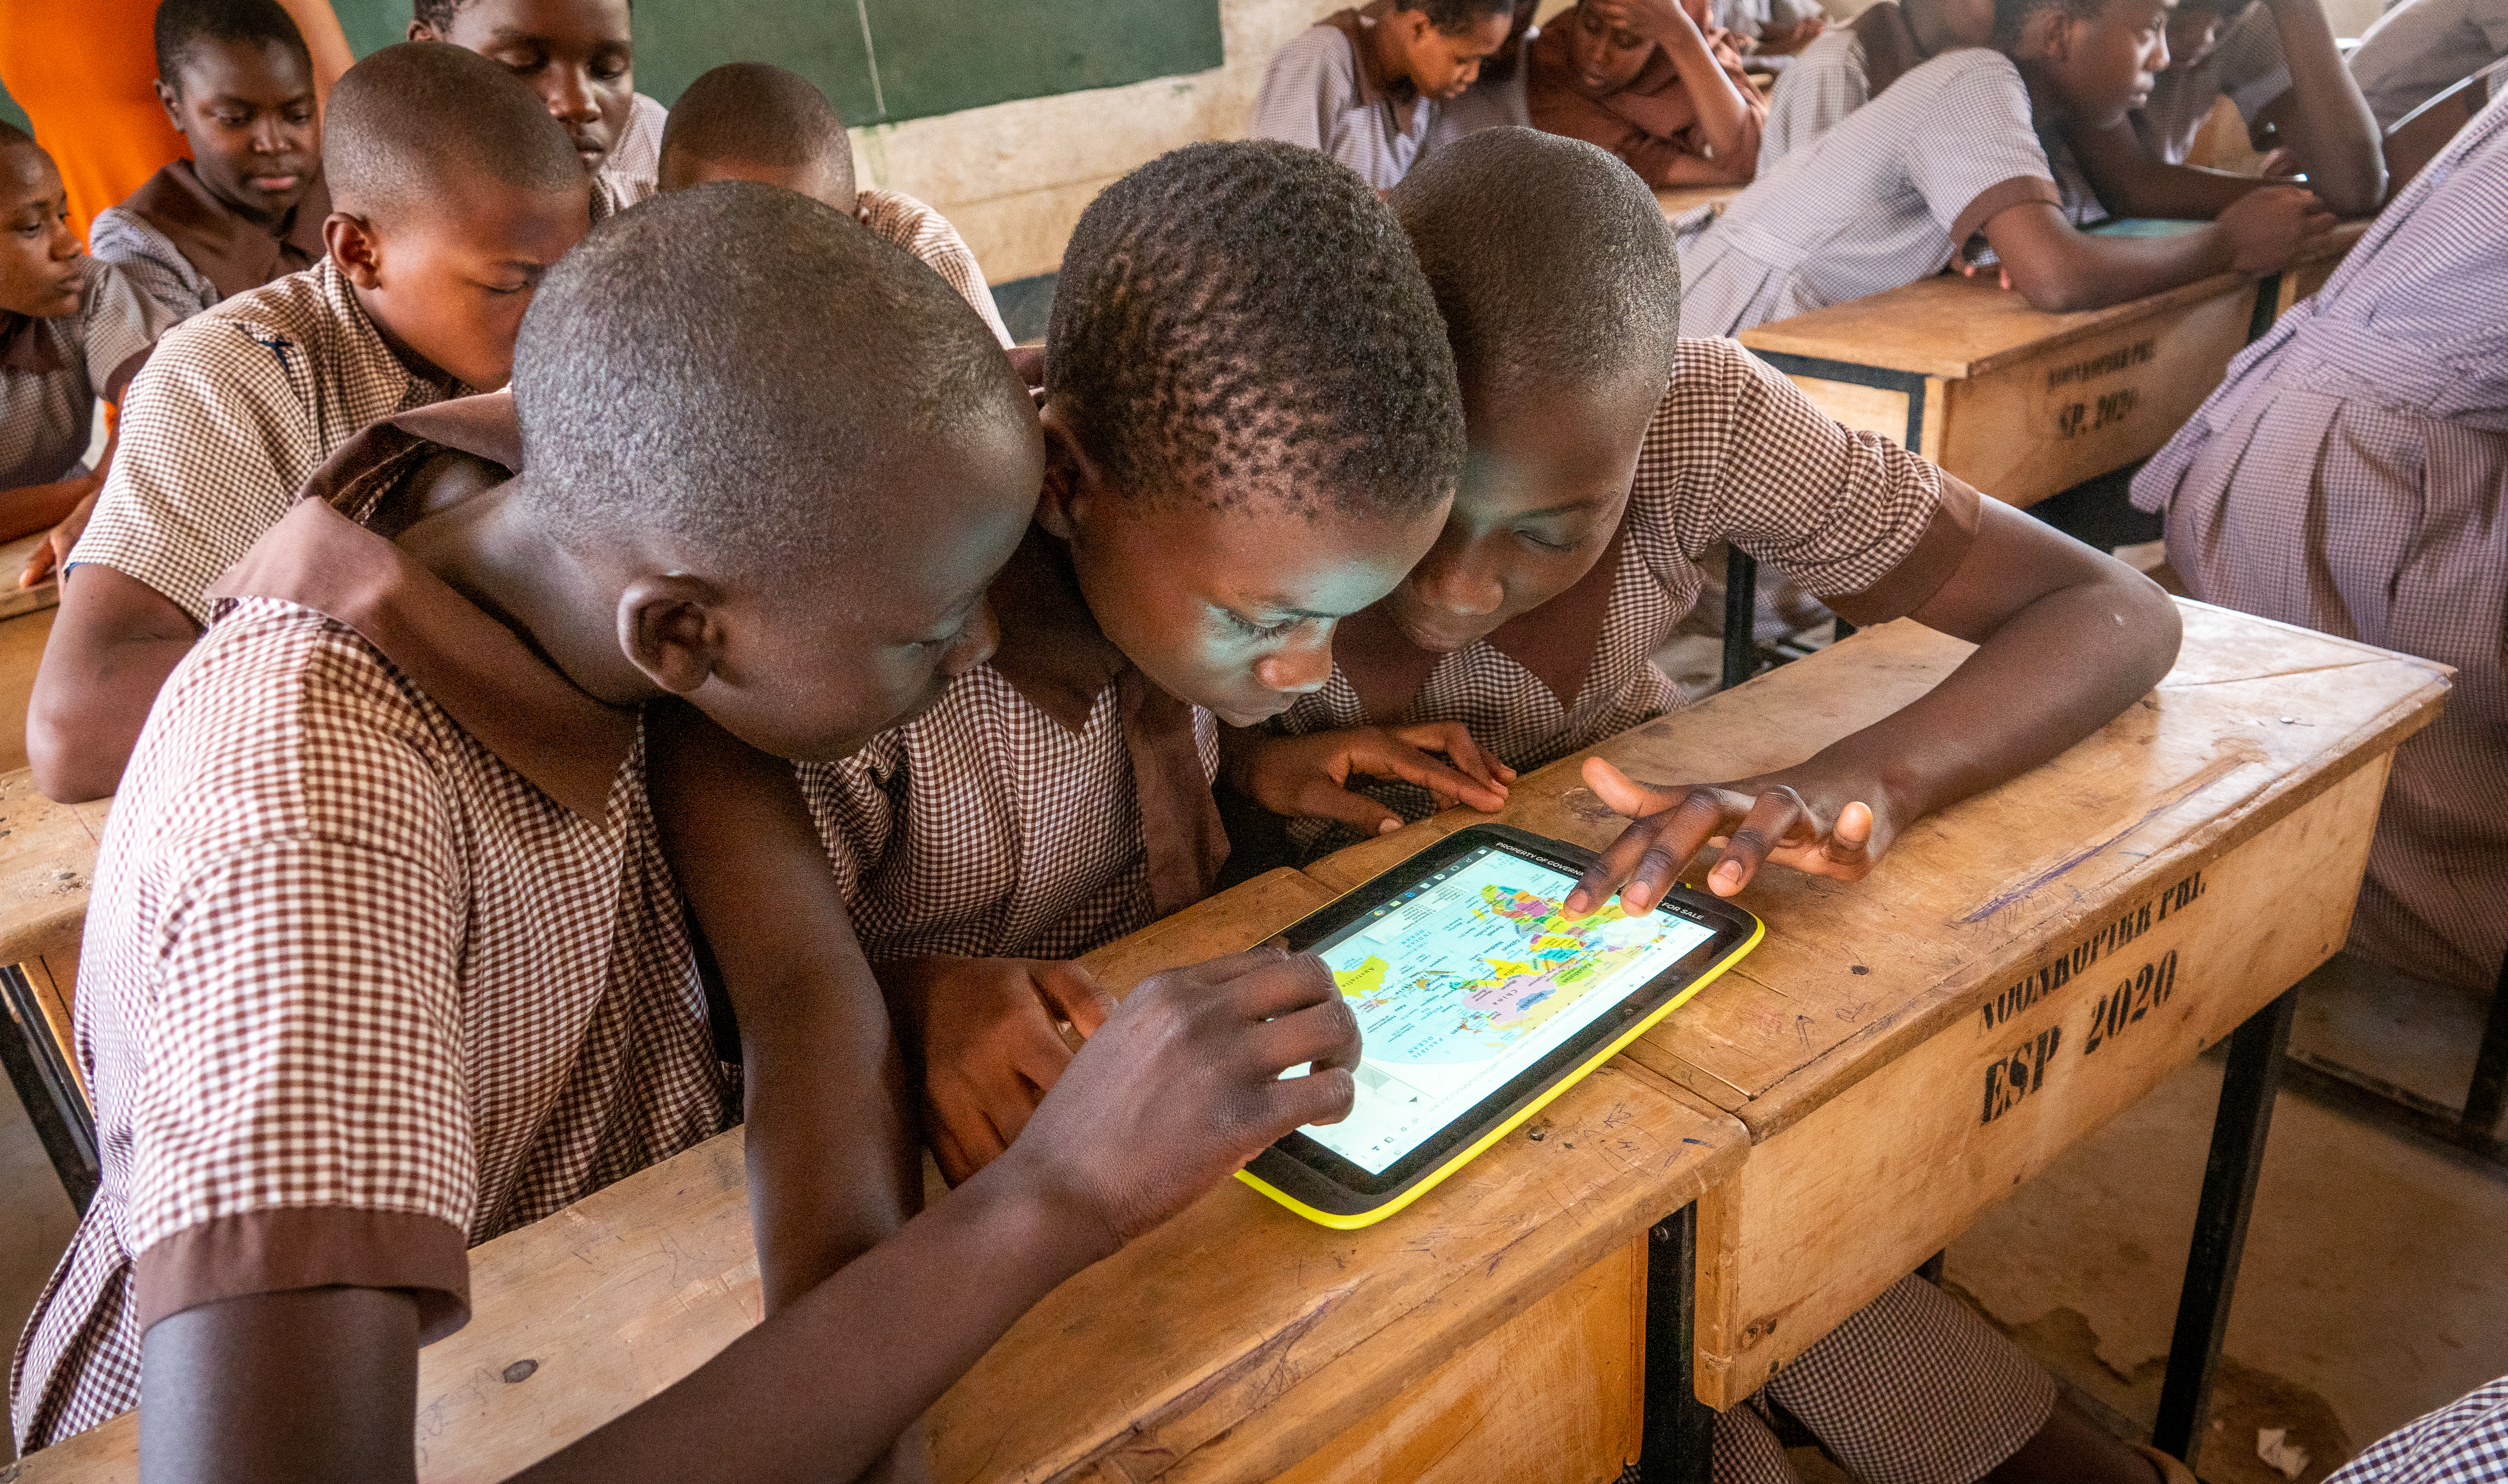 Three Kenyan schools in a girl are looking at the image of a world map on an iPad.